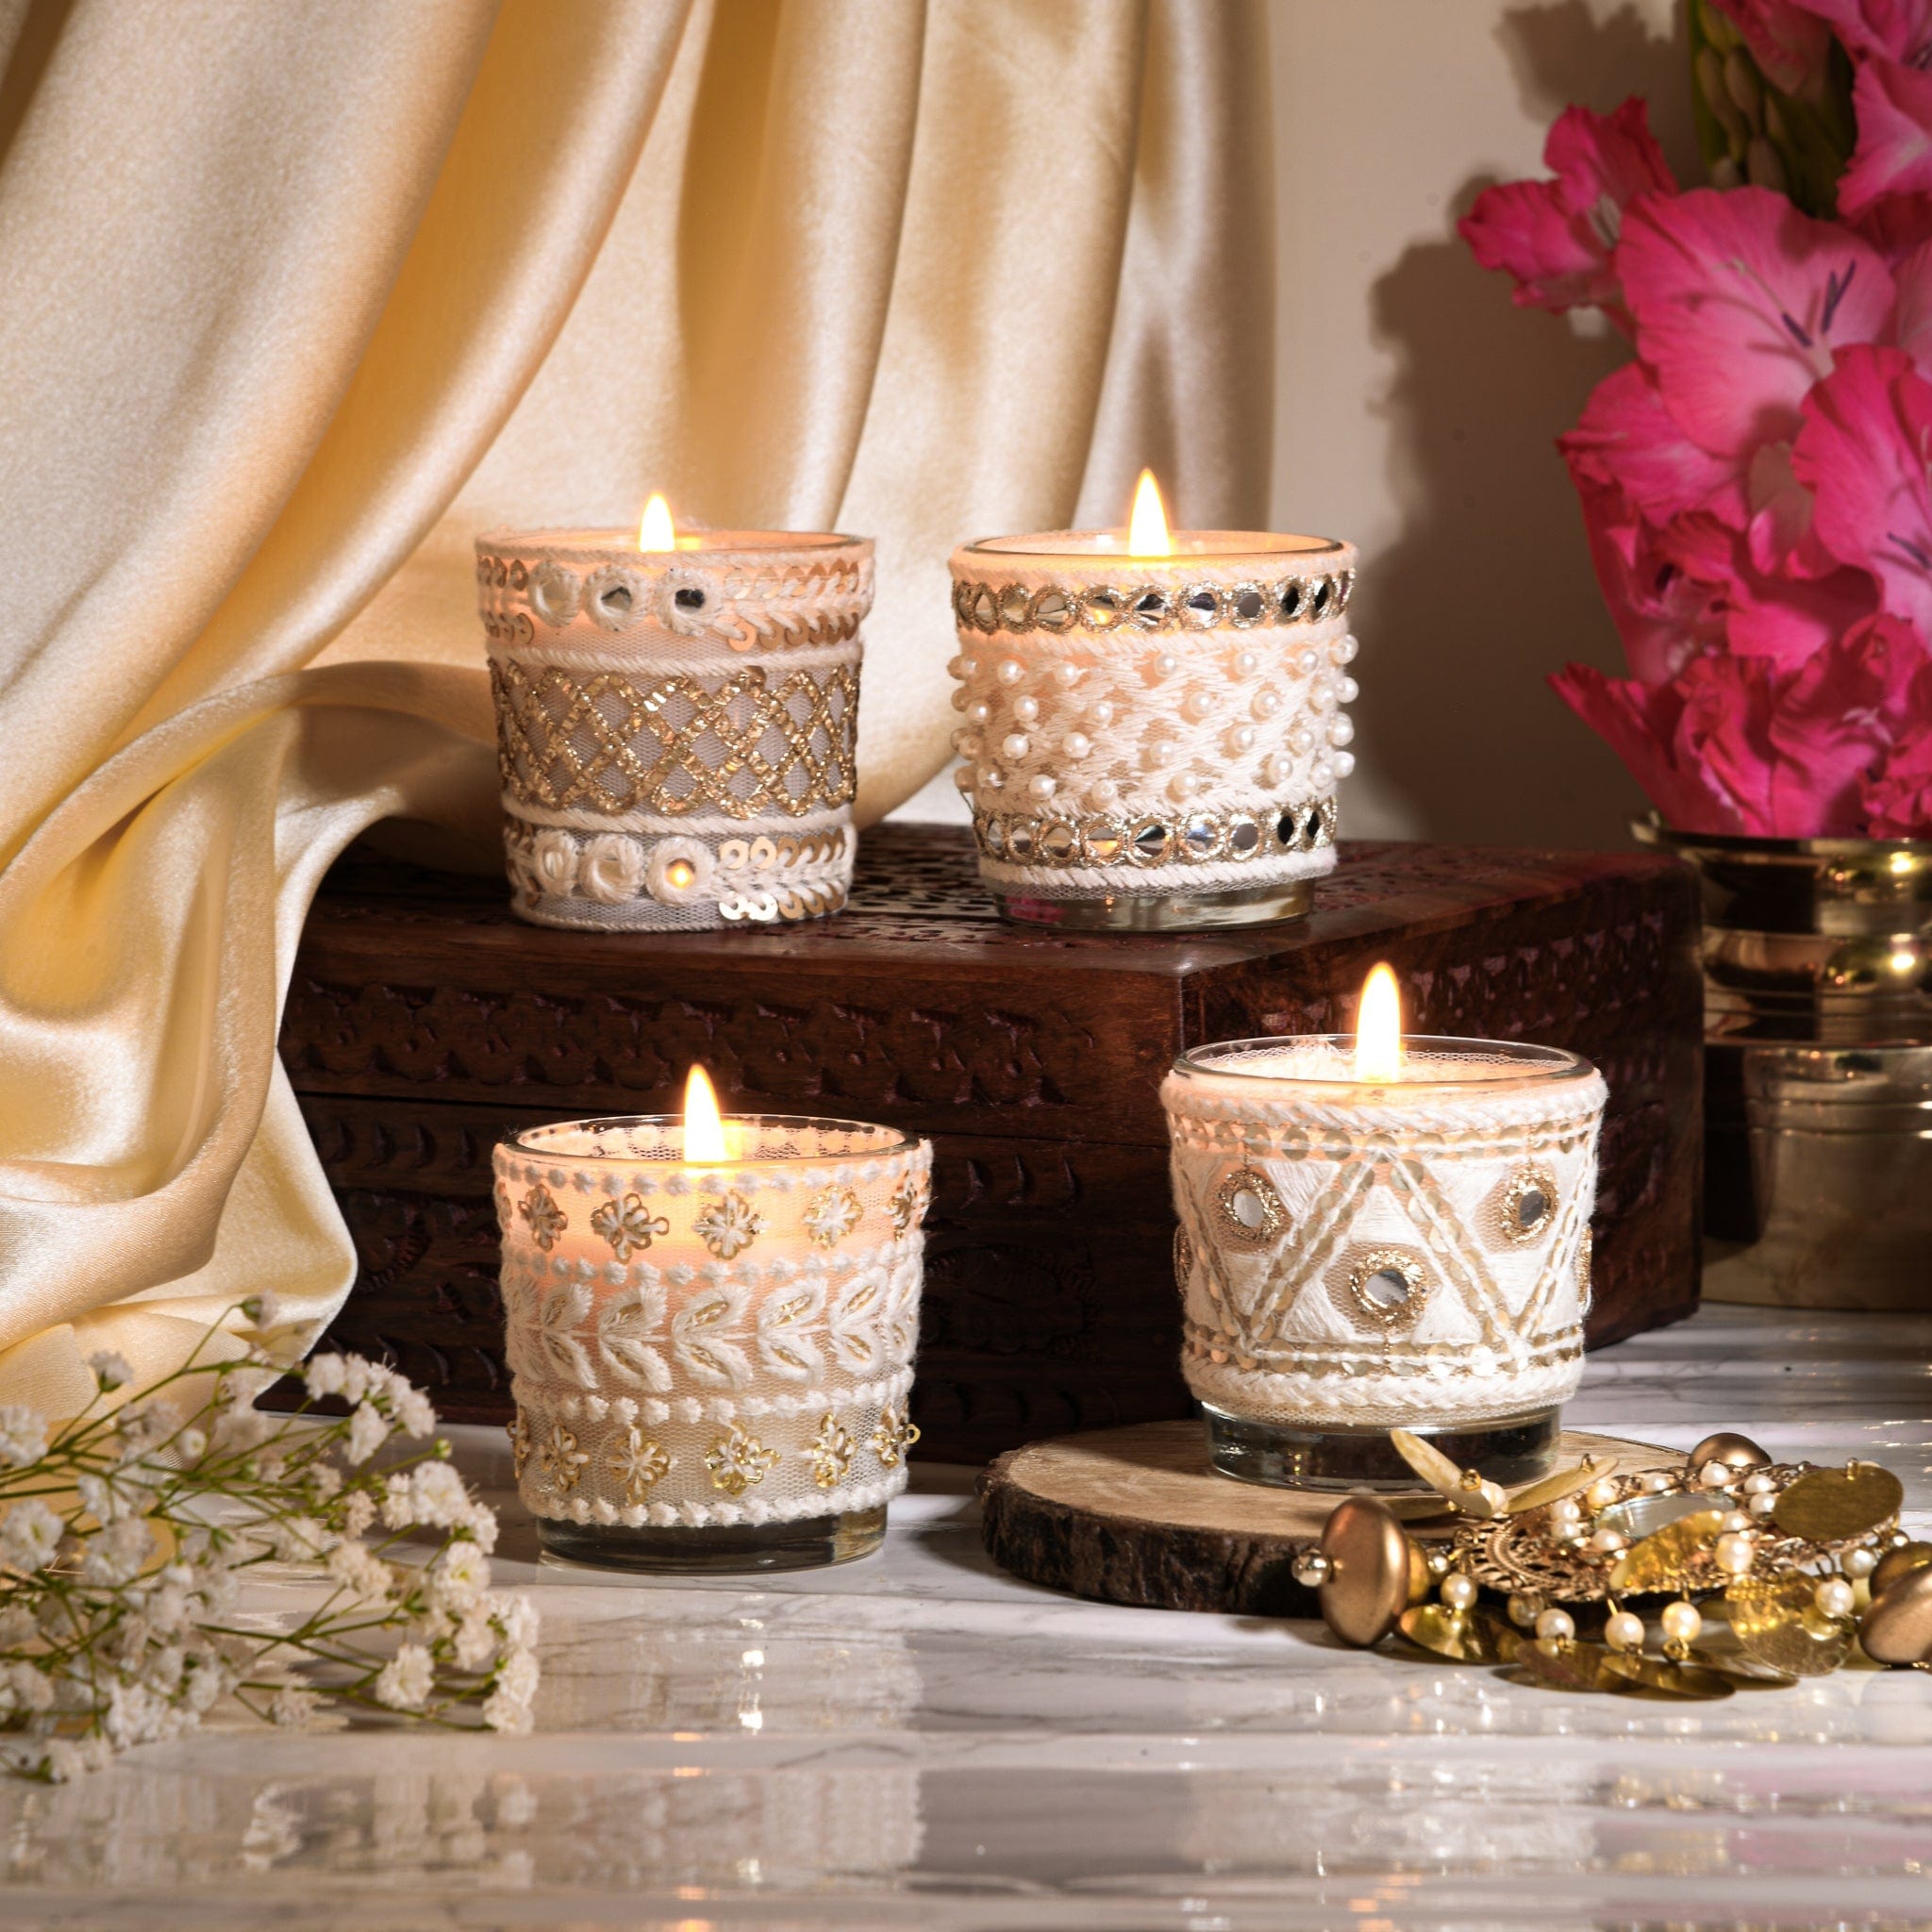 Ibaadat - Gift Set of 2 Votive Candles (Nag Champa and Honey Spice Scented)